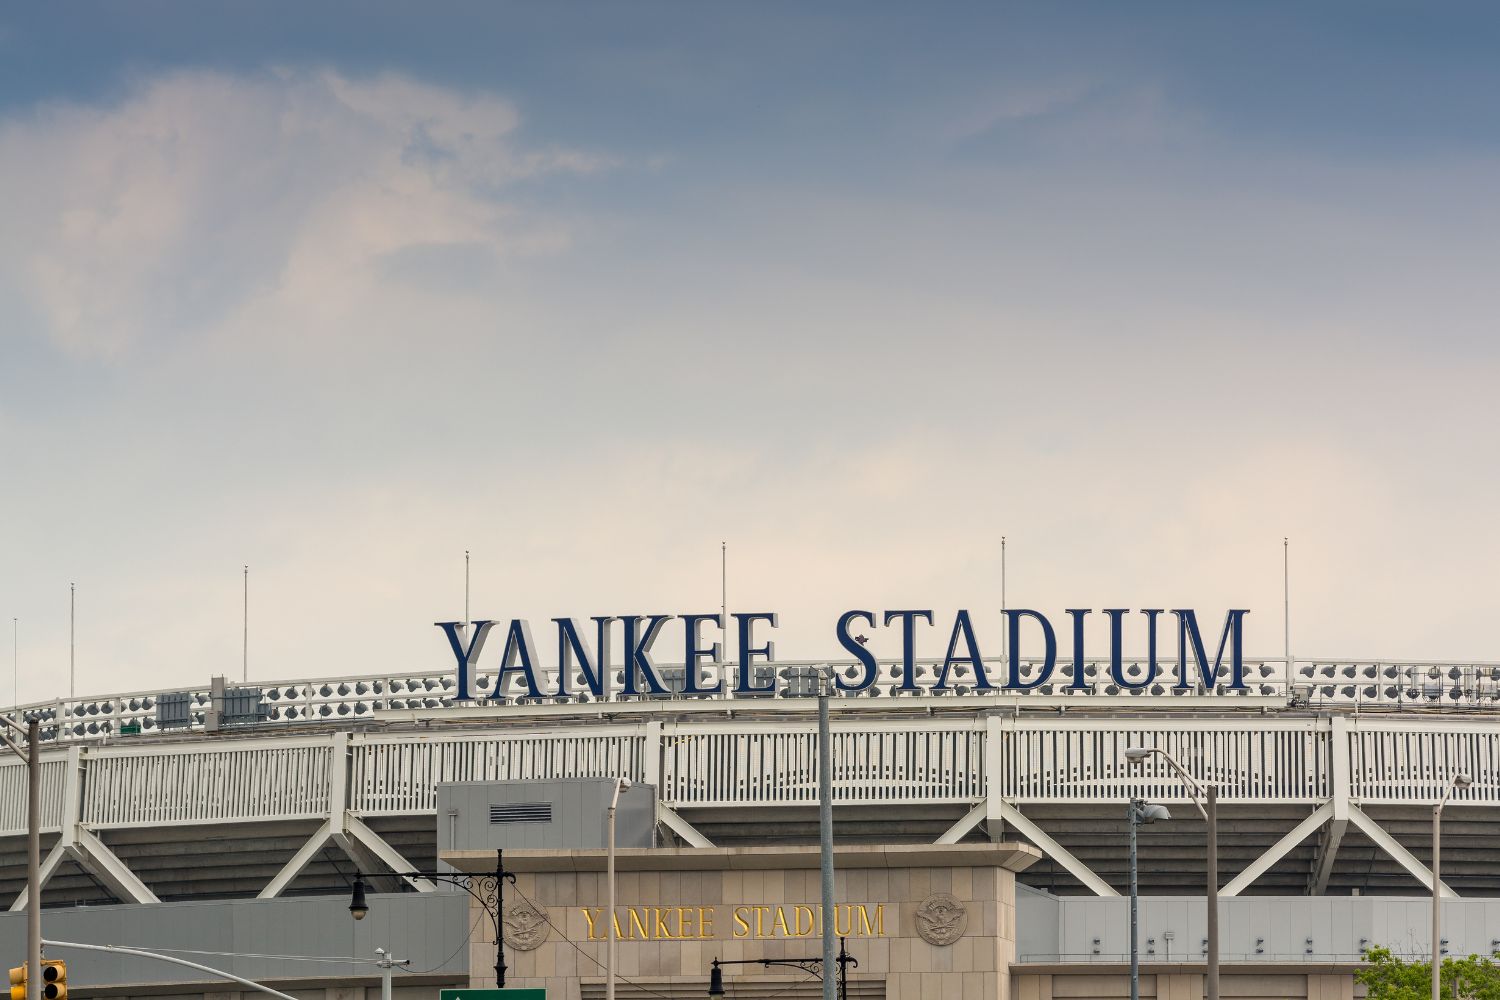 Ronald Phillips reveals some interesting facts about the New York Yankees